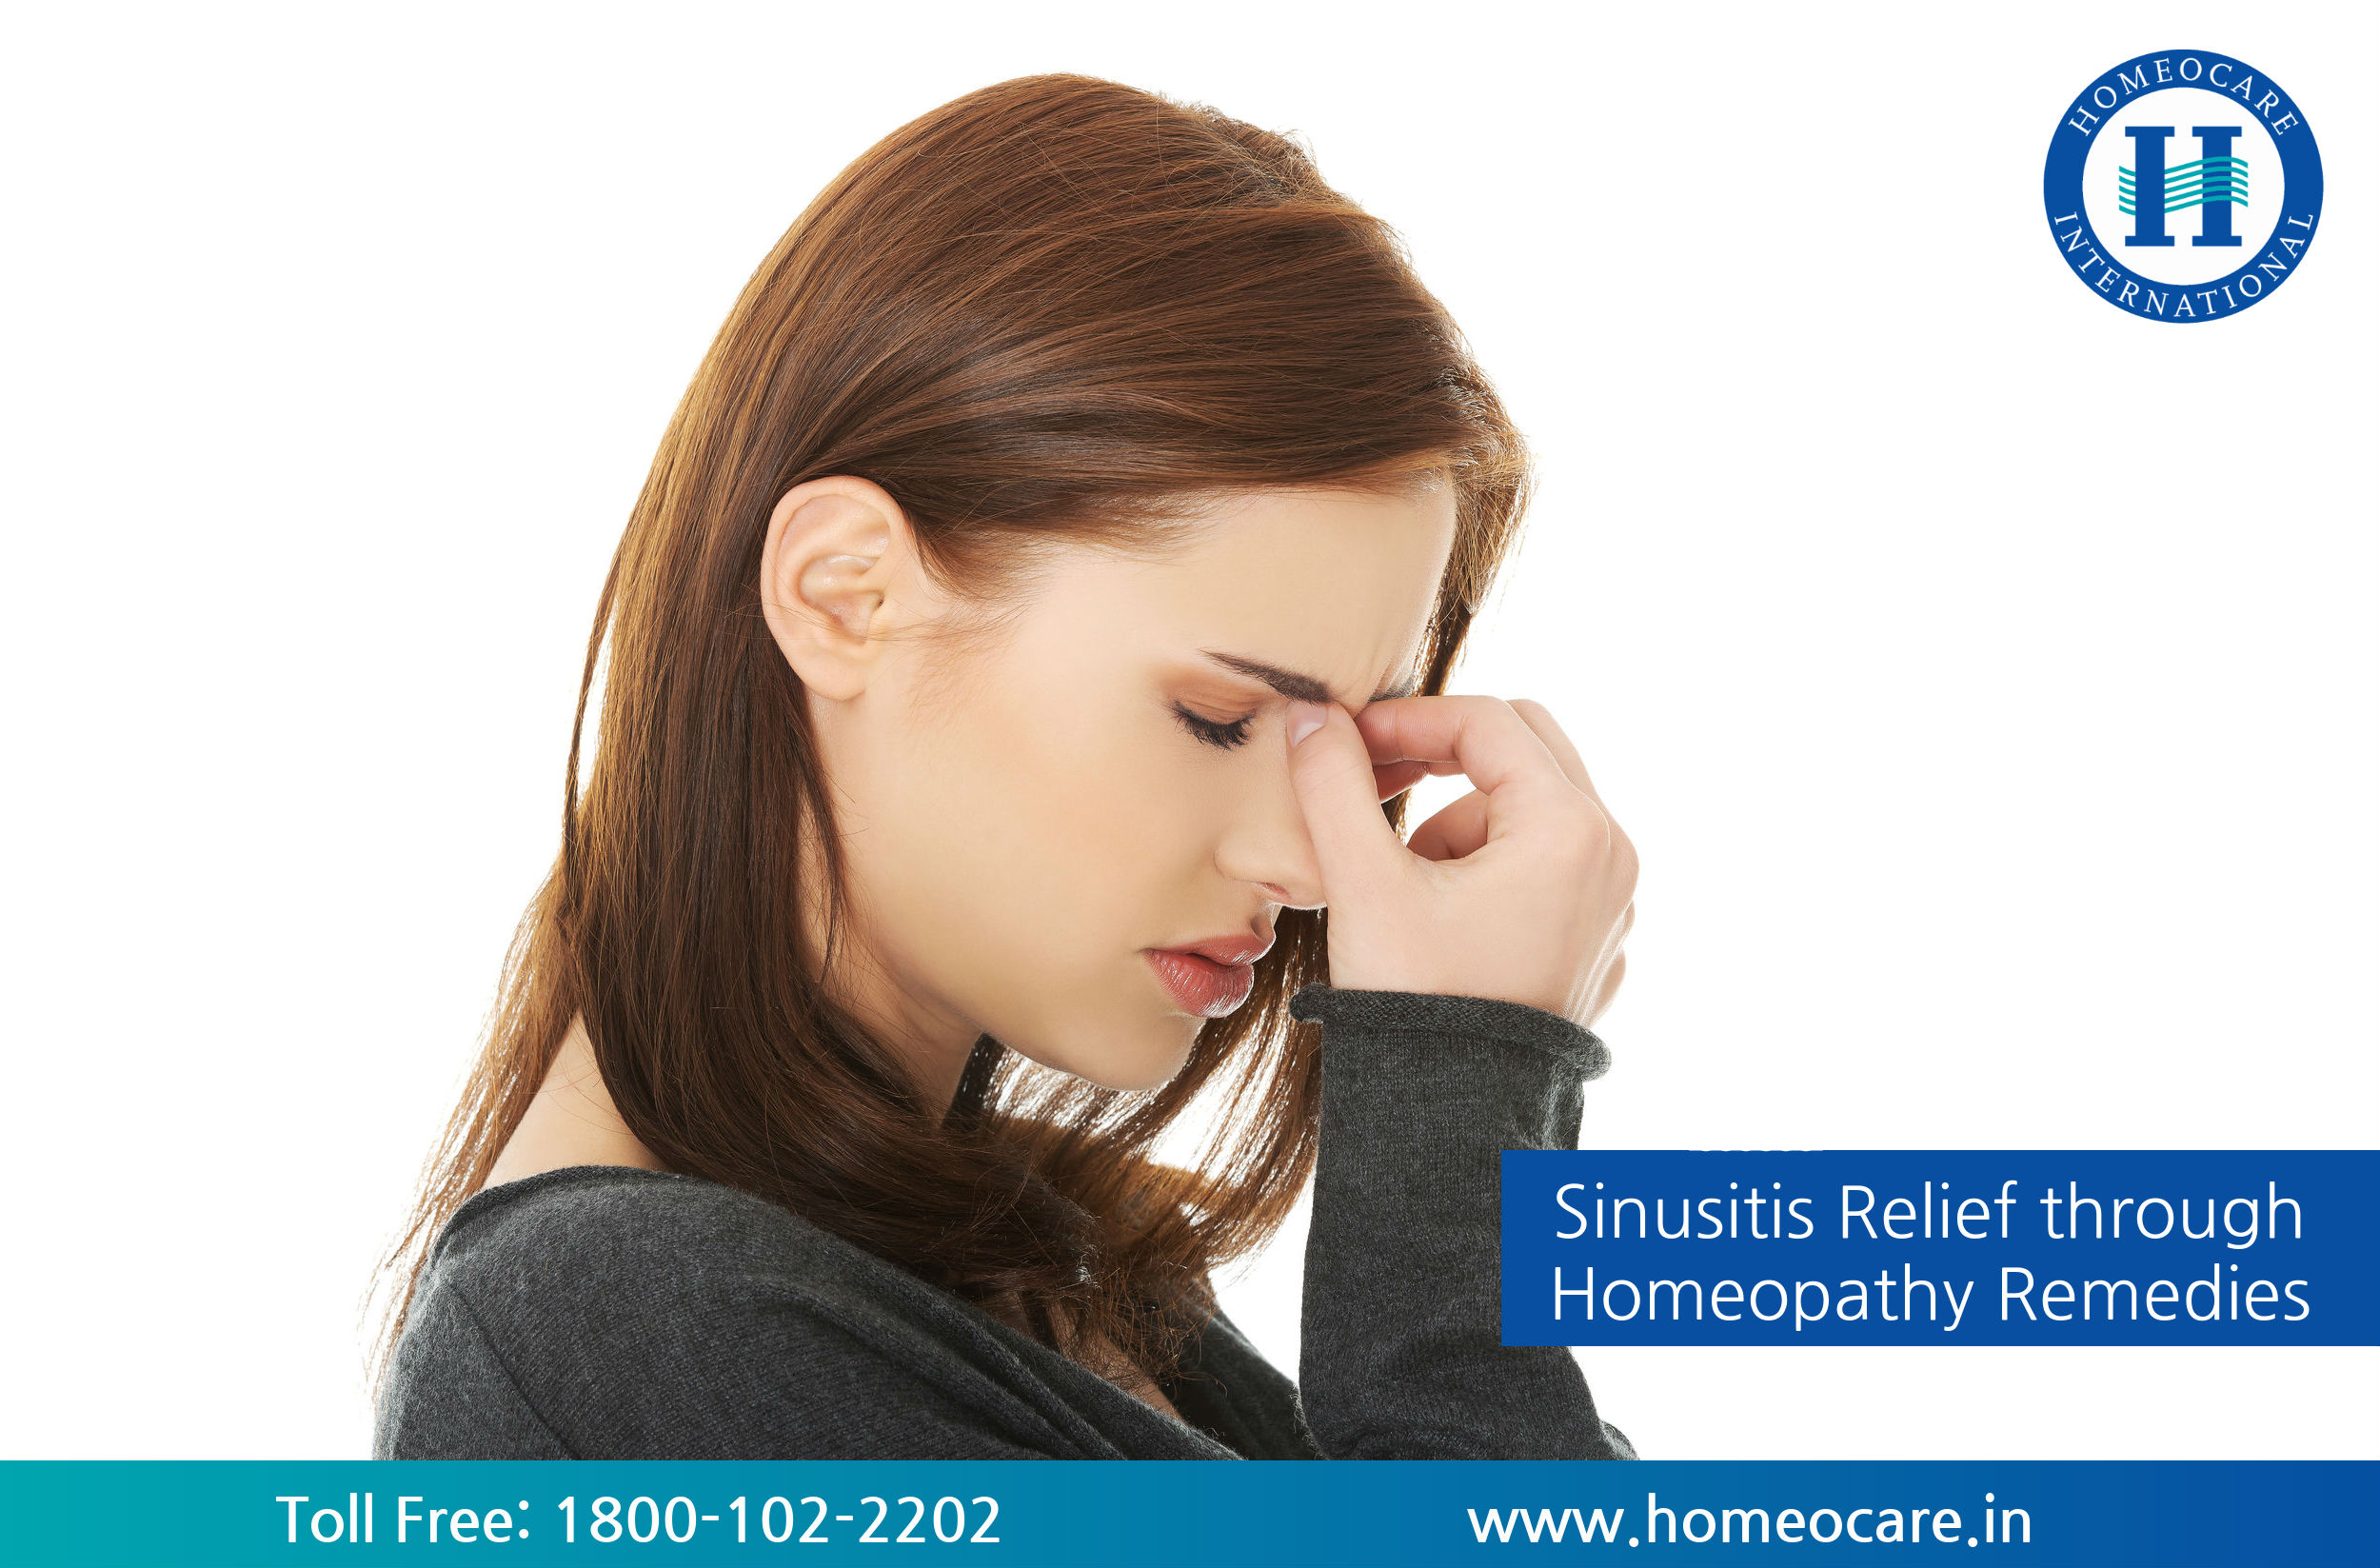 Sinusitis Relief through Homeopathy Remedies